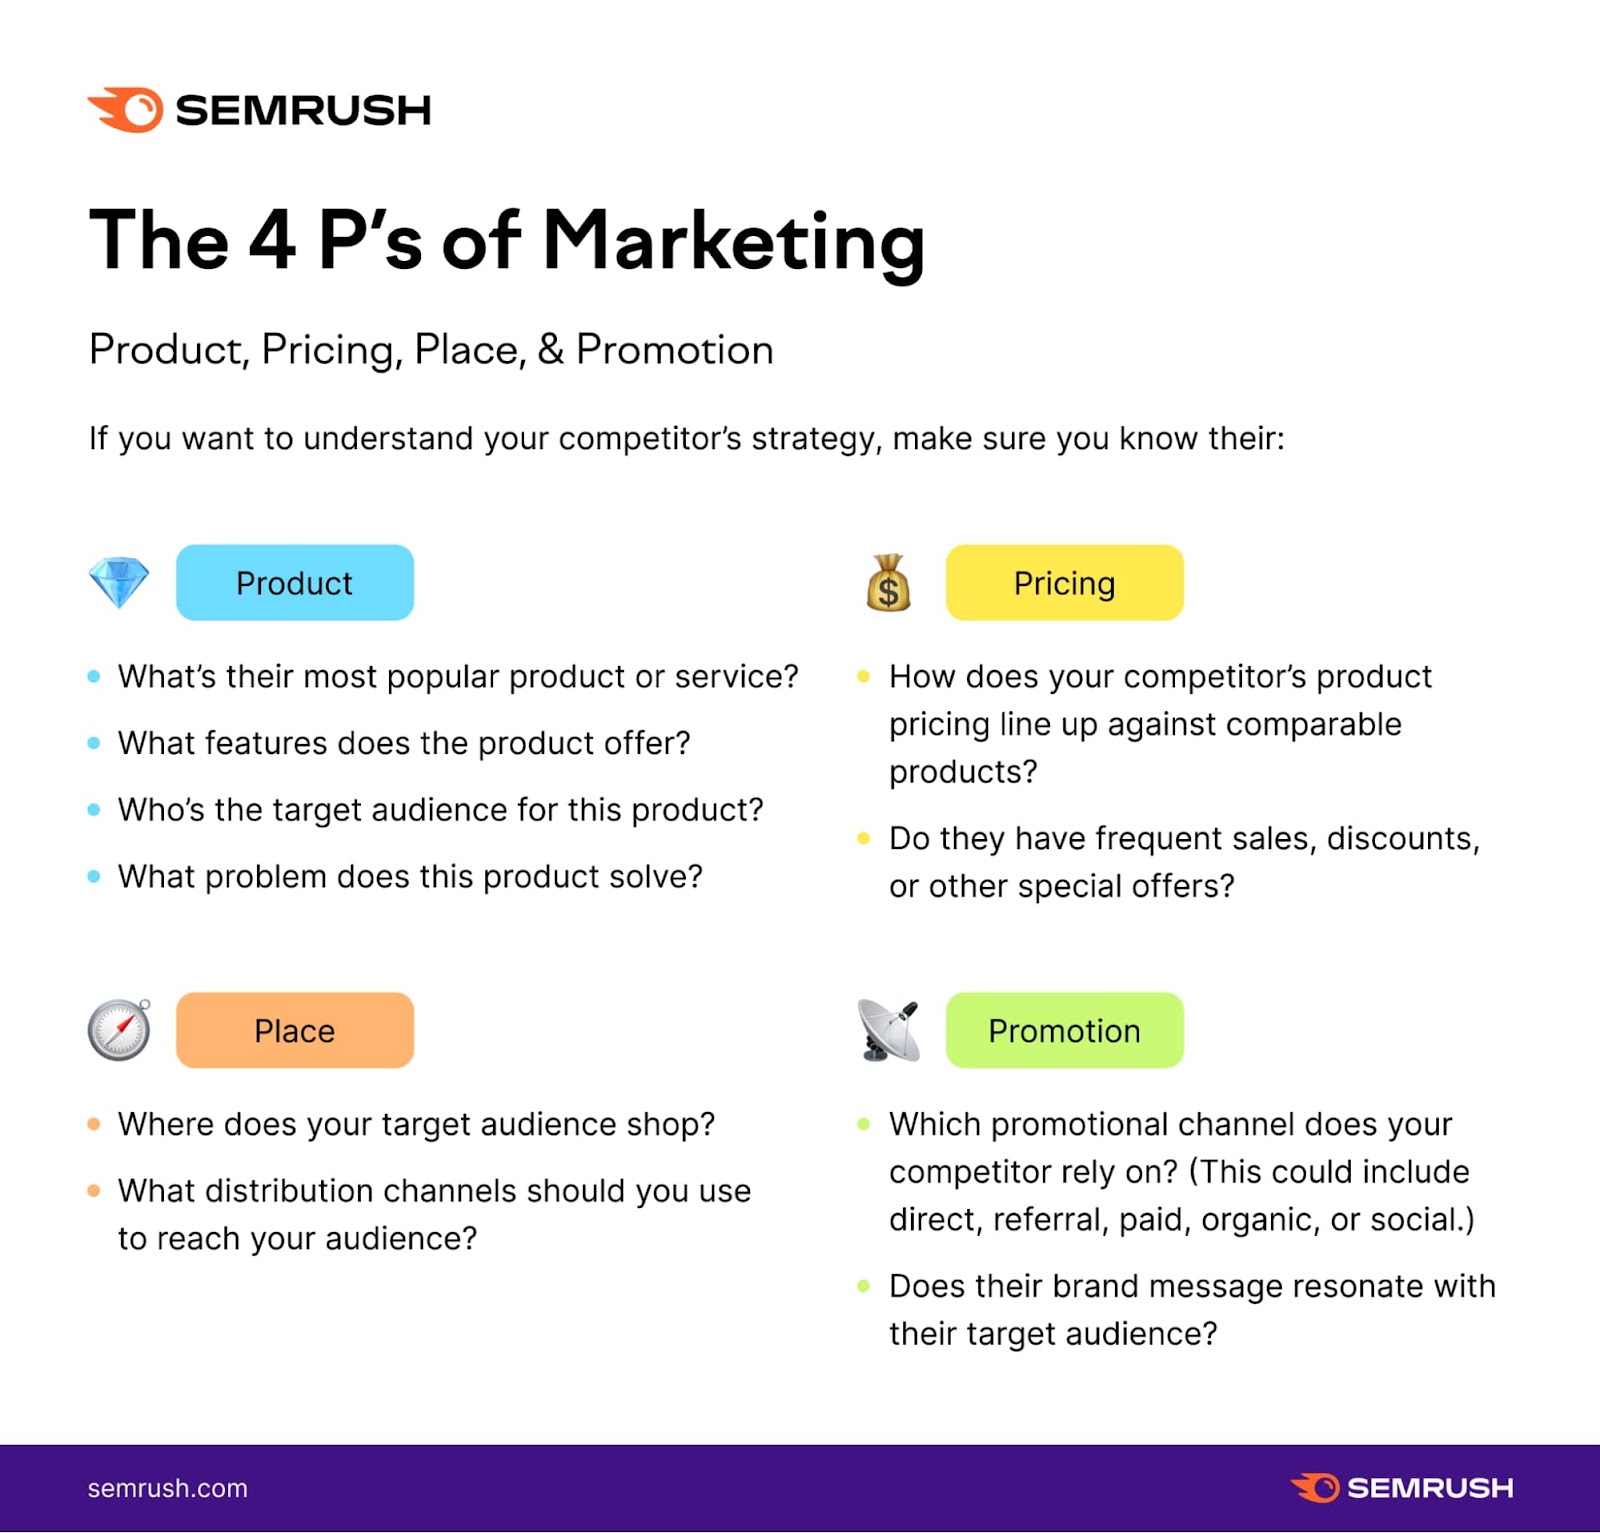 An infographic explaining the 4 P's of marketing